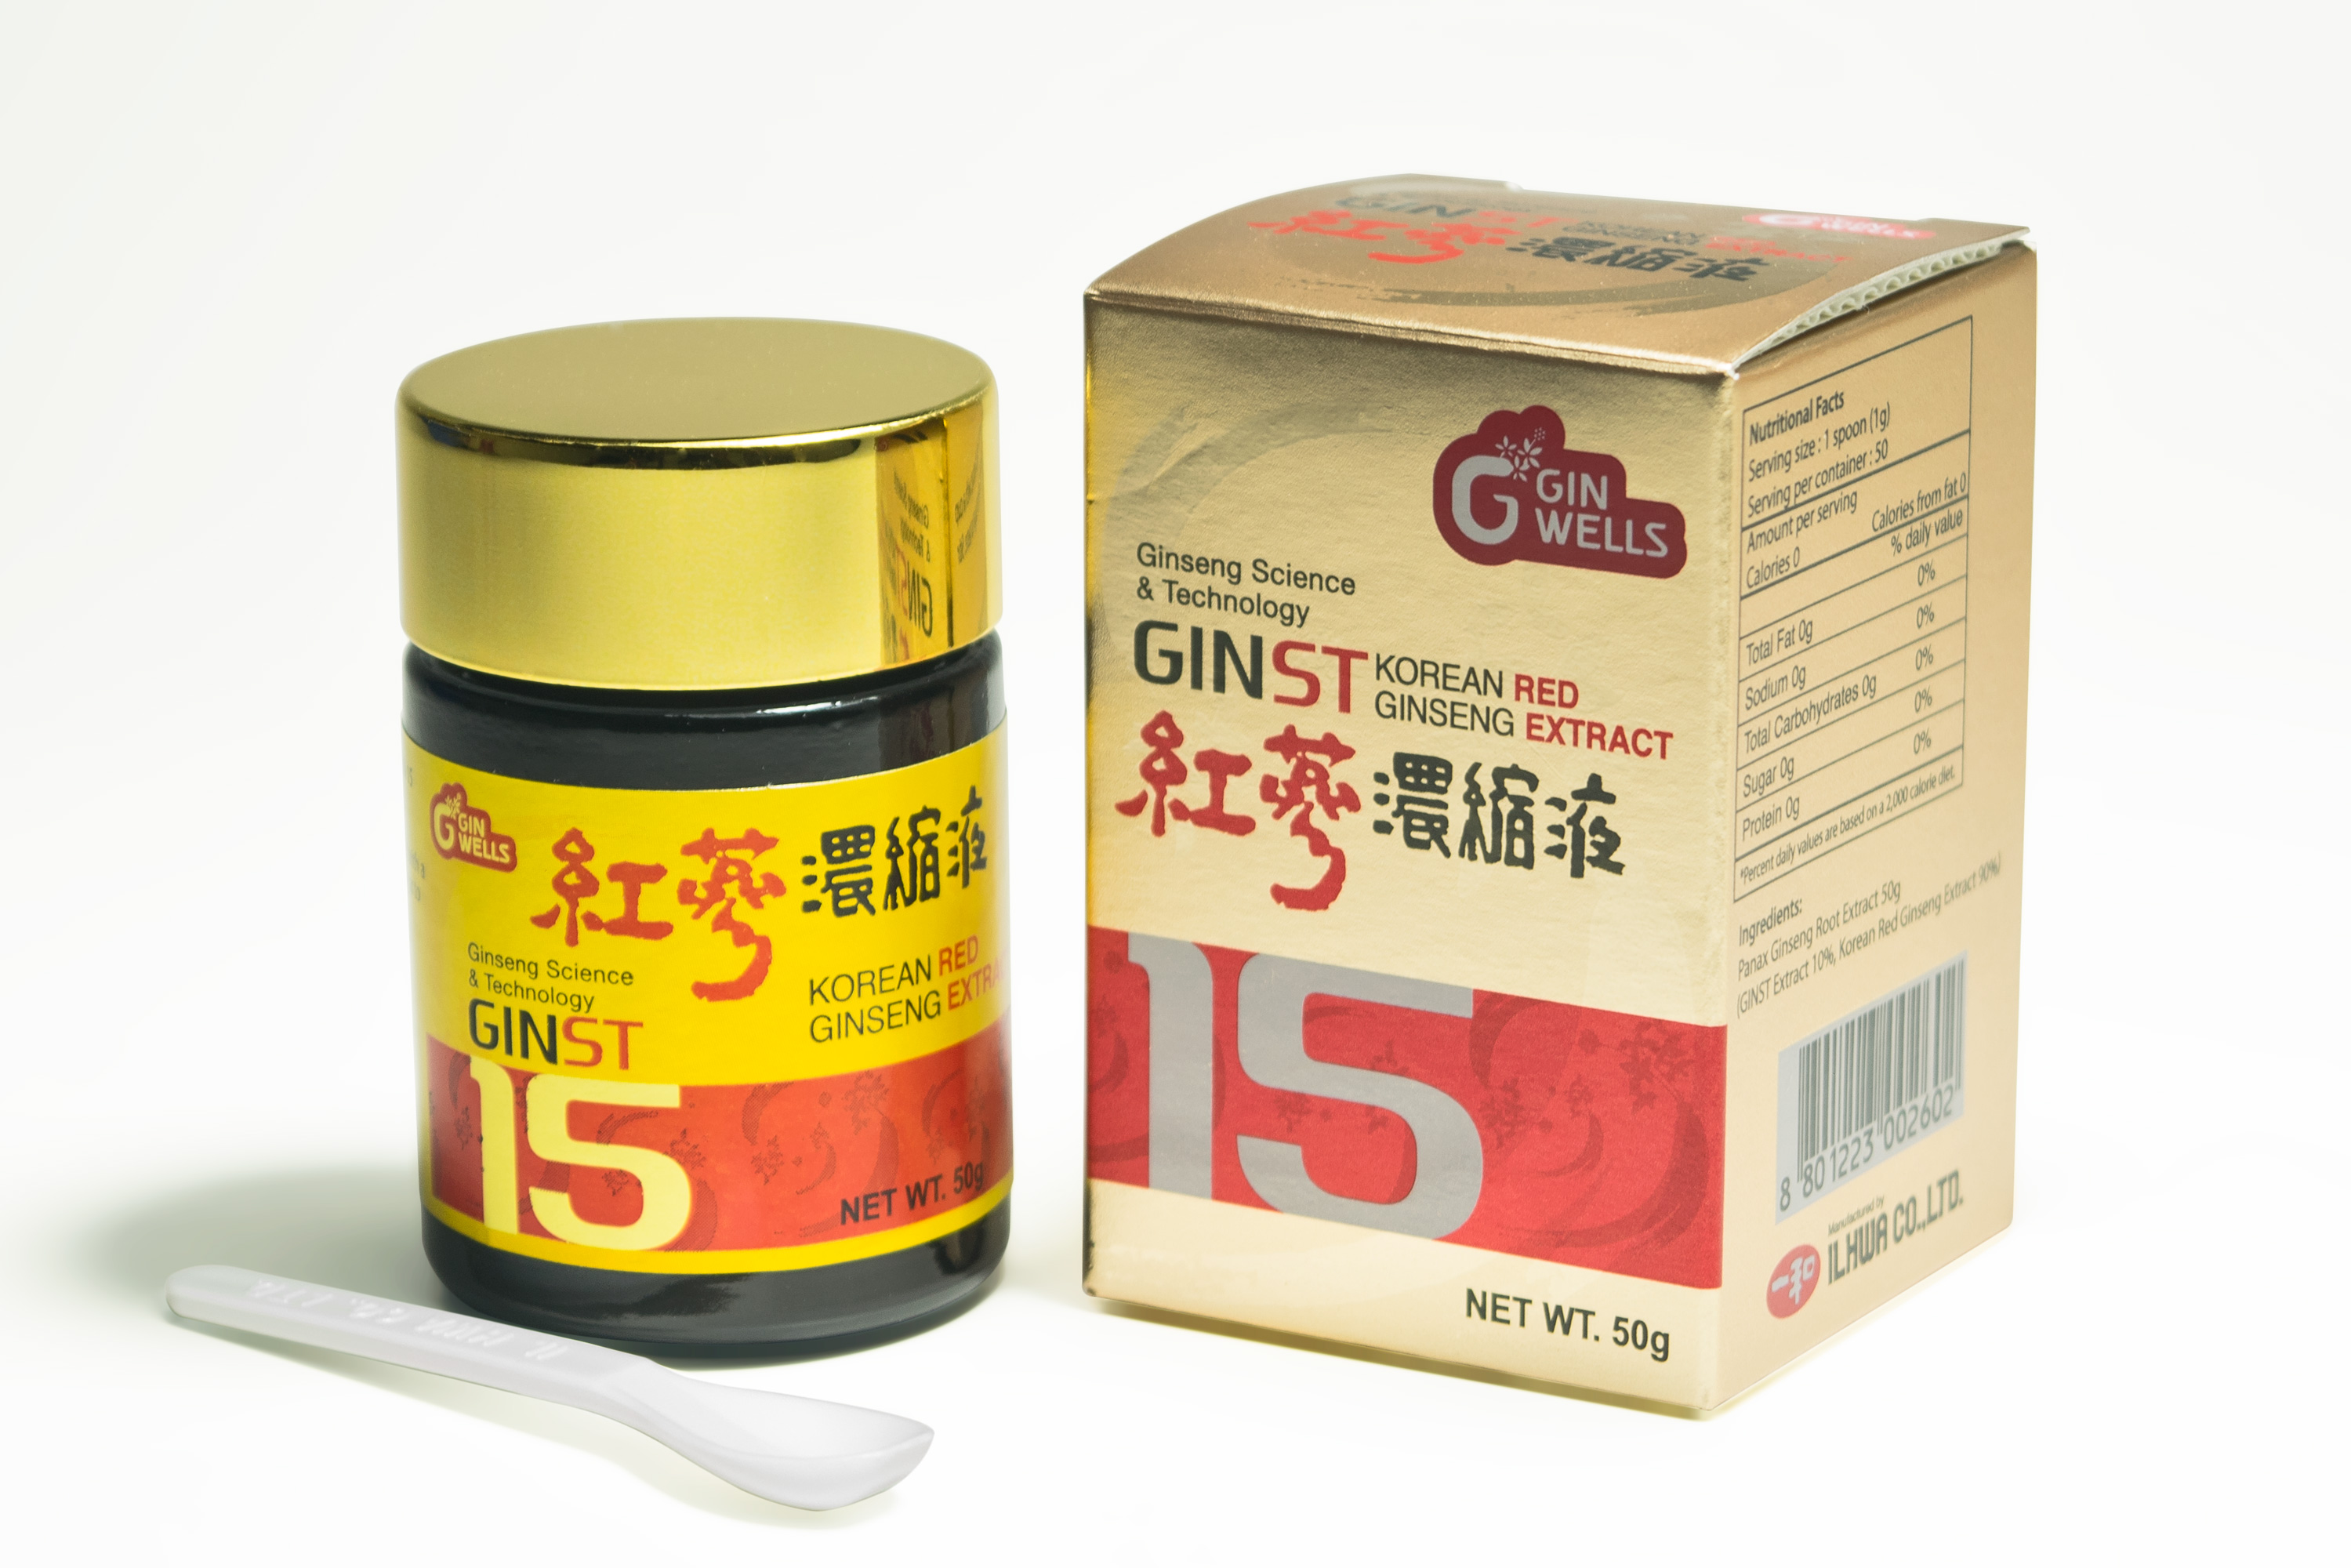 GINST 15 KOREAN RED GINSENG EXTRACT 50GRM...